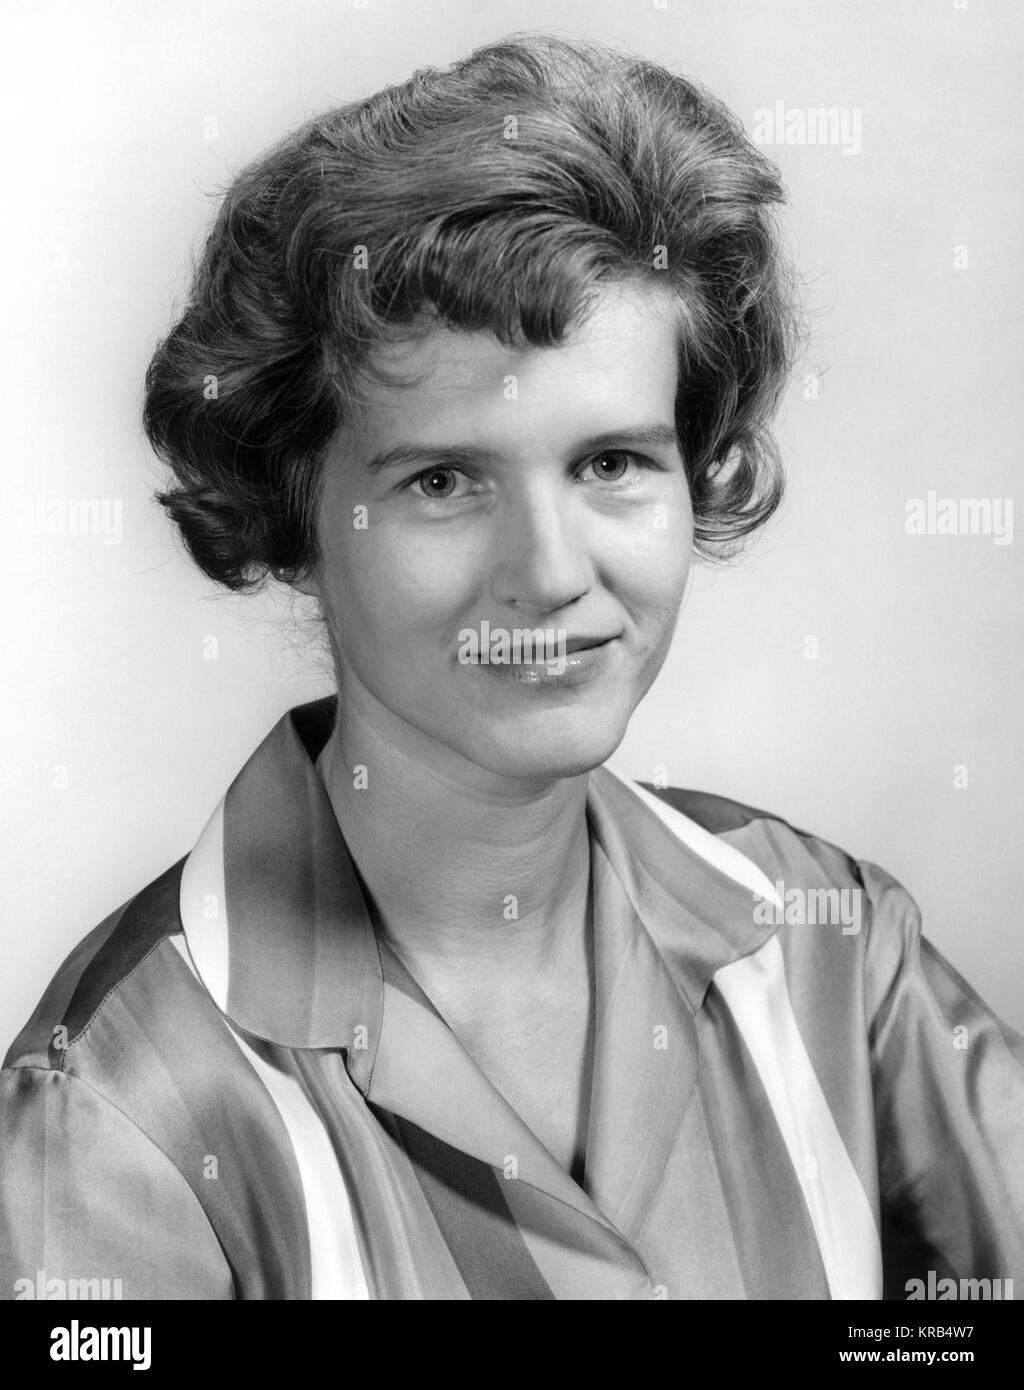 THIS IS A PORTRAIT OF MARIA VON BRAUN, WIFE OF THE FAMOUS MARSHALL SPACE FLIGHT DIRECTOR WERNHER VON BRAUN. Maria von Braun 6330121 edited Stock Photo